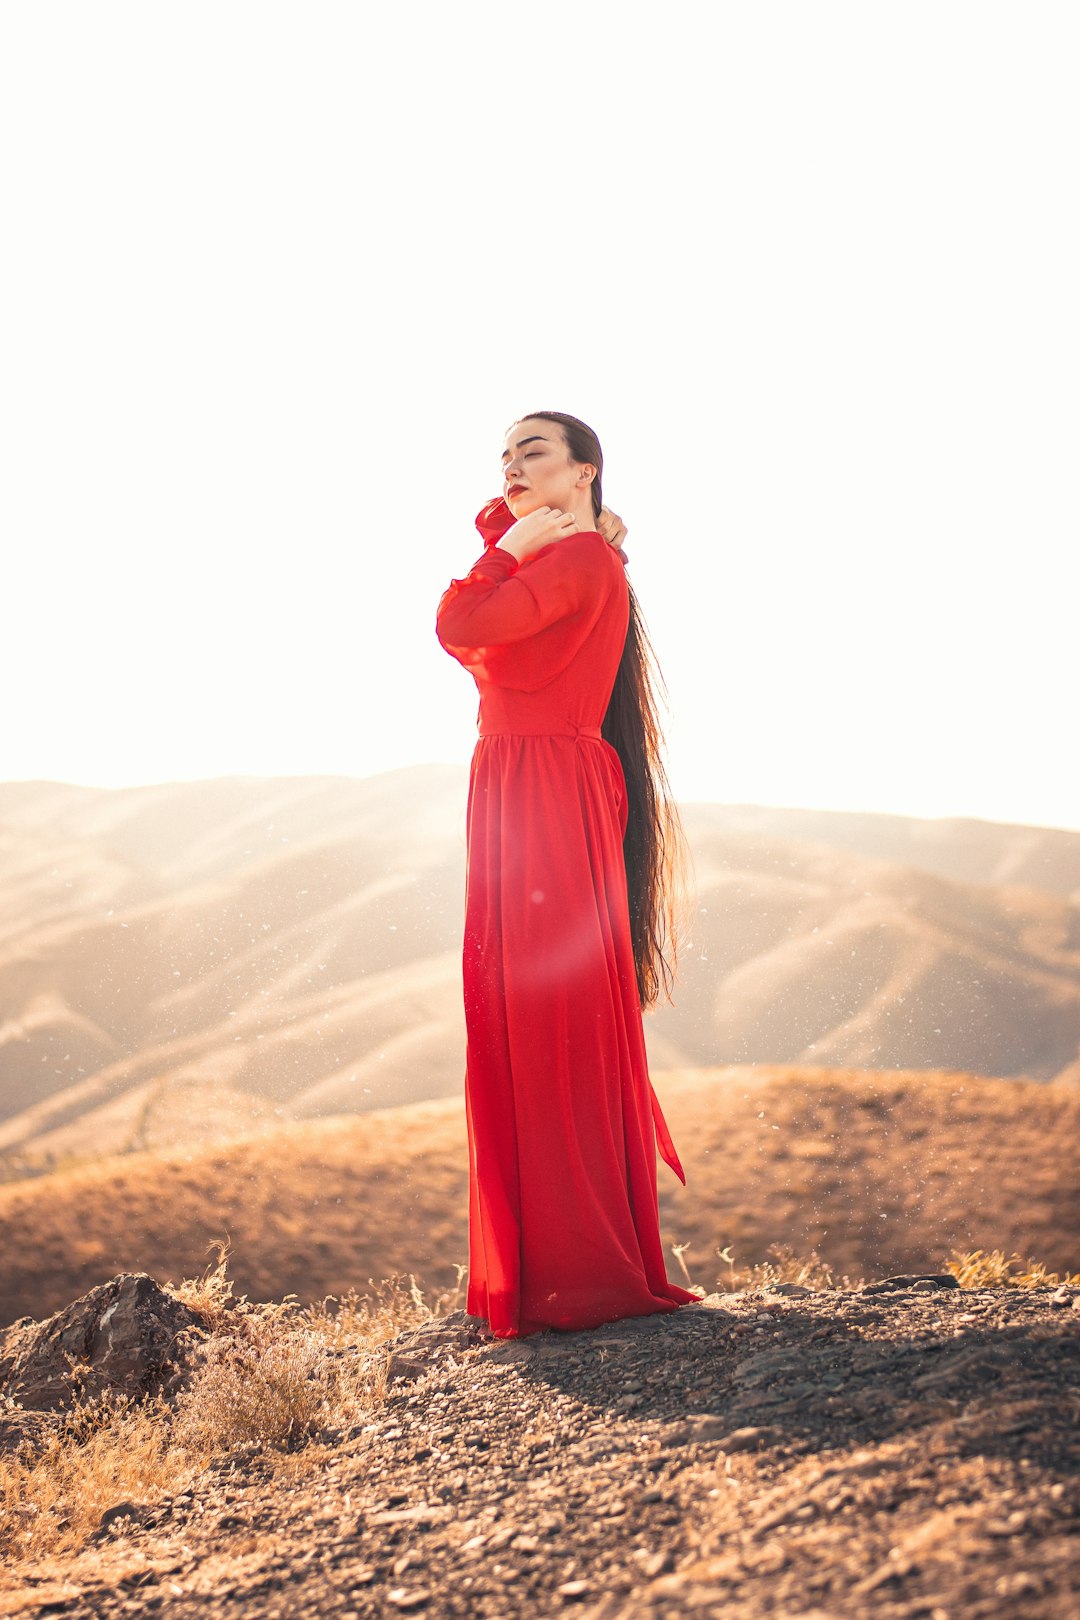 woman in red dress standing on brown grass field during daytime